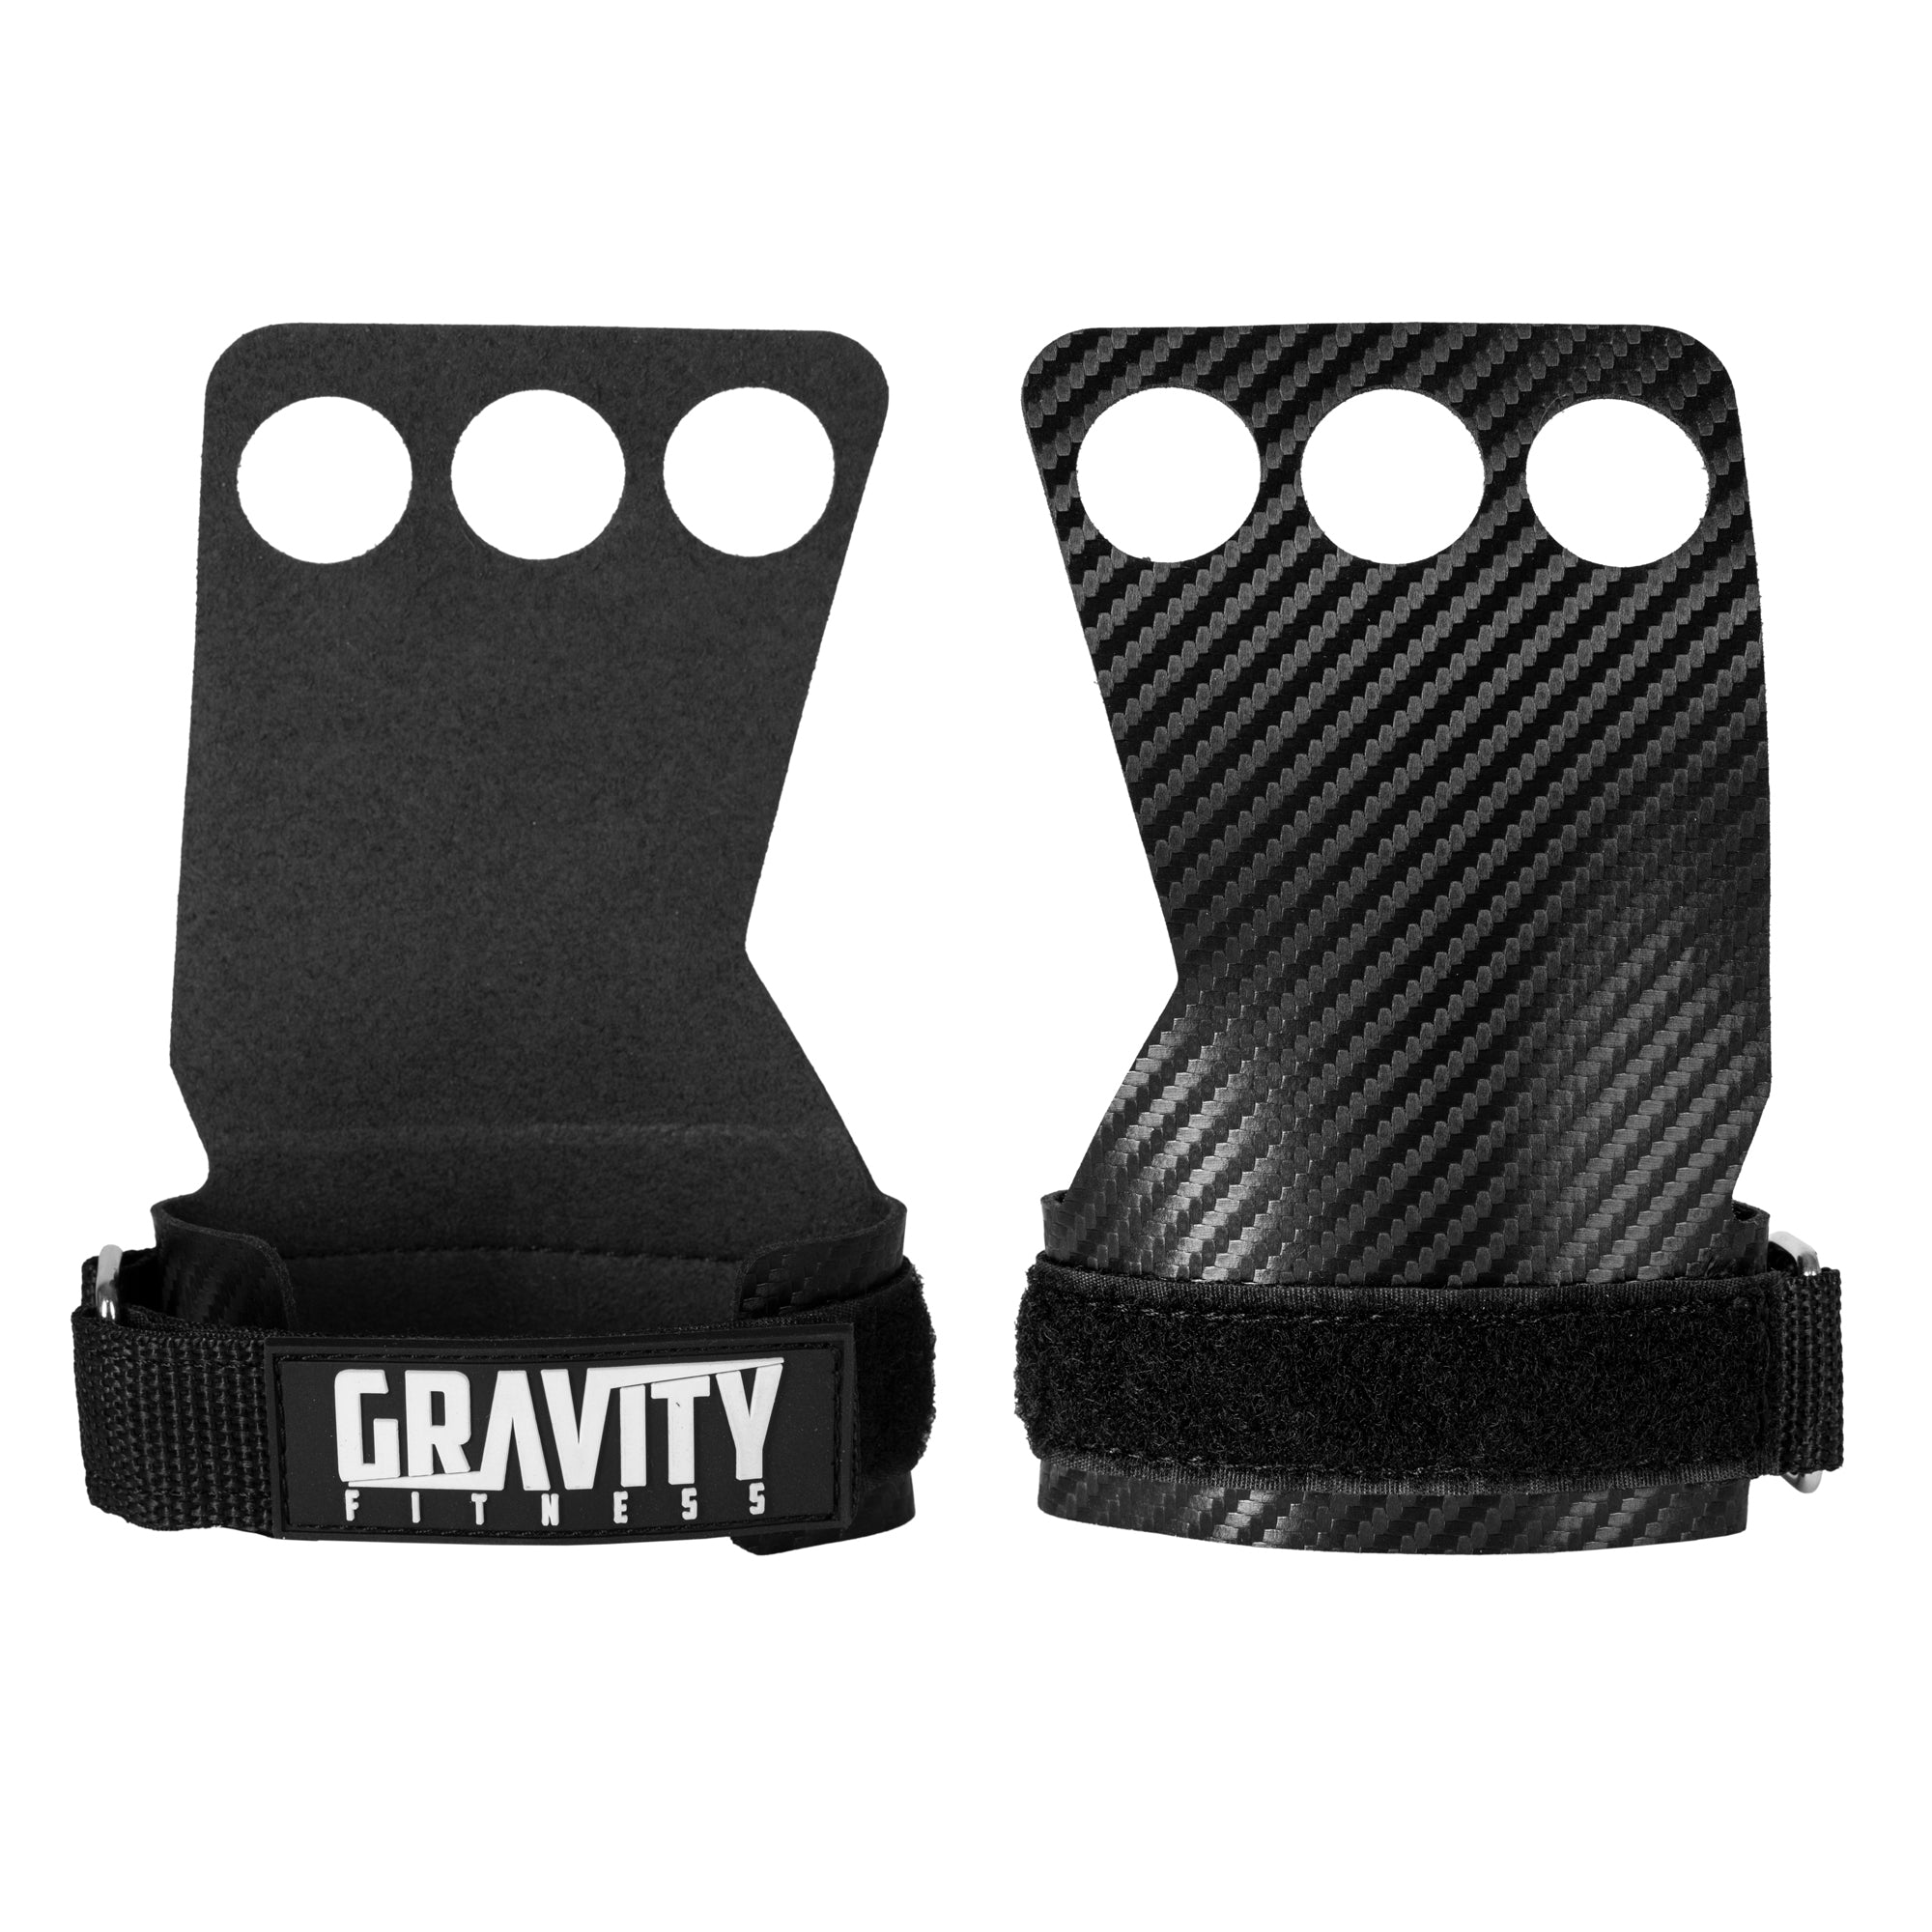 Gravity Fitness Gymnast Grips & Hand Protectors